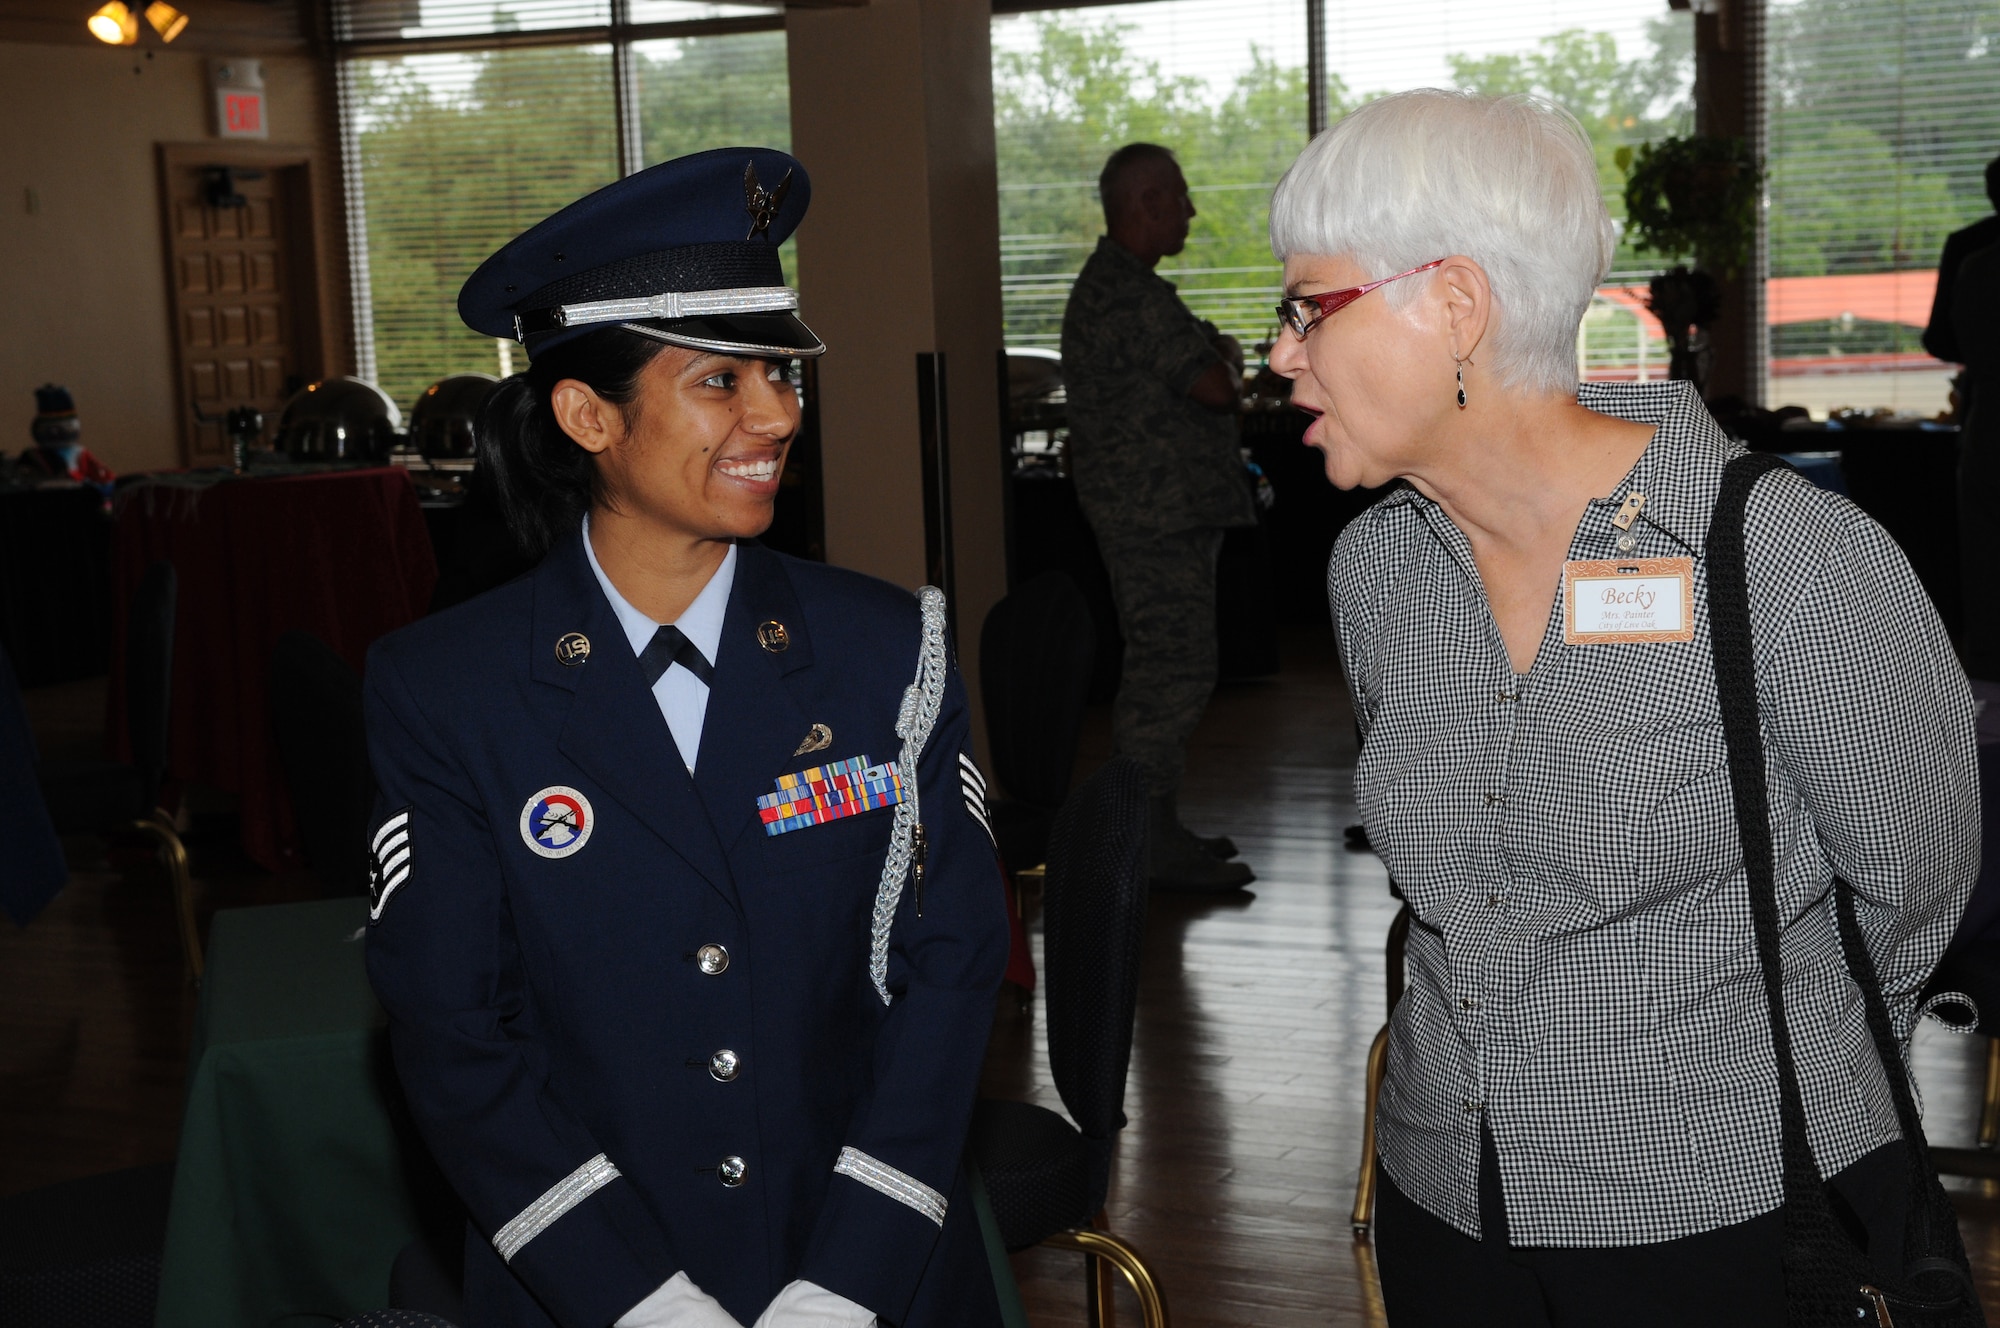 SSgt Cristina Gutierrez of the Randolph Air Force Base Honor Guard speaks with Ms. Becky Painter; a new Randolph Honorary Commander from the City of Live Oak. The Honorary Commanders Program enhances the positive relationship between Randolph Air Force Base and the surrounding communities. The reception was held 10 Sept, at the Randolph Air Force Base Parr Club. (U.S. Air Force photo/Melissa Peterson)   